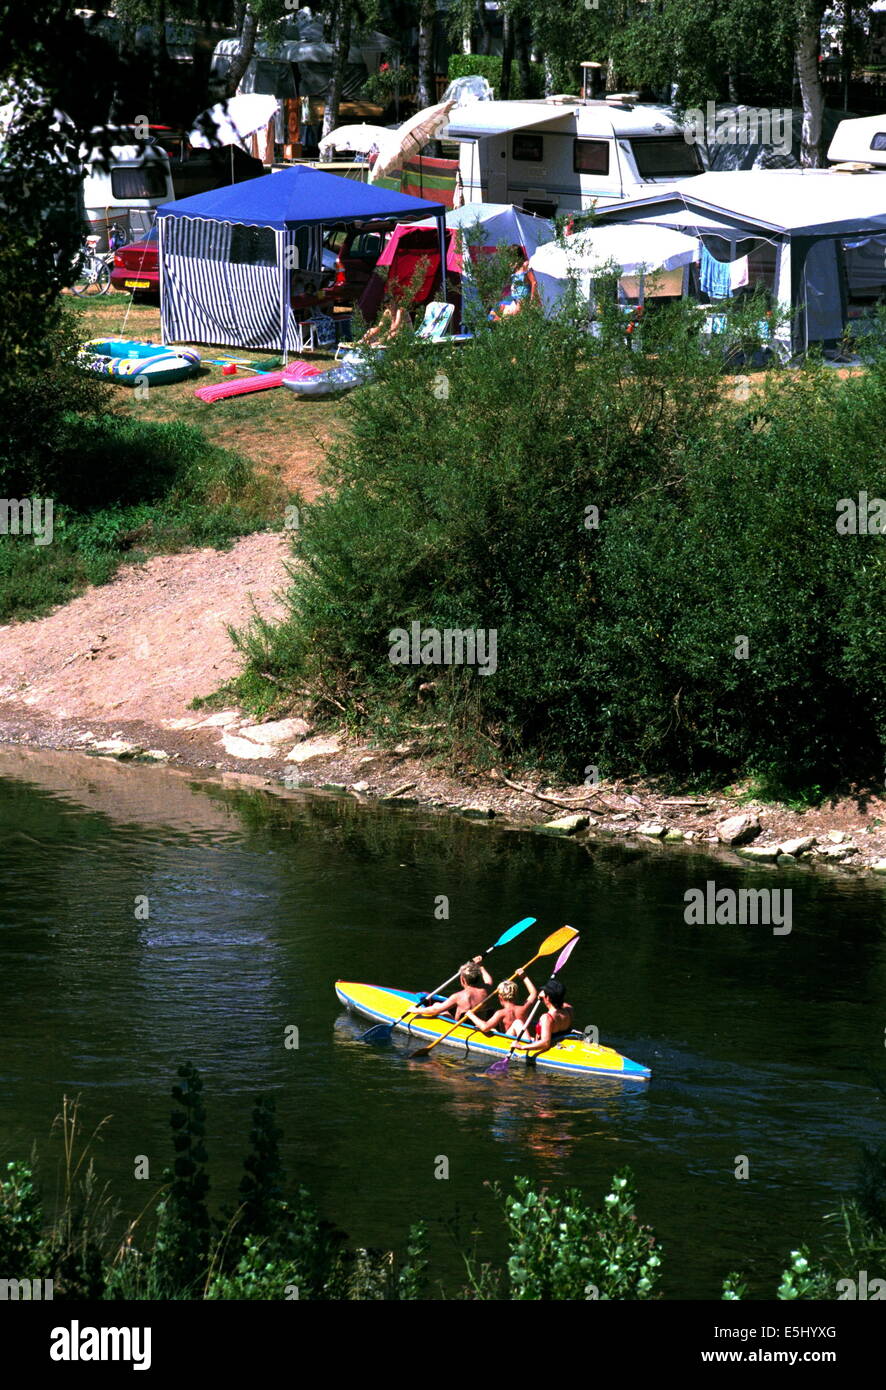 ECHTERNACH,LUXEMBOURG. CAMPING AND CANOEING ON THE RIVER SÛRE ON THE GERMAN  BORDER. PHOTO:JONATHAN EASTLAND/AJAX Stock Photo - Alamy